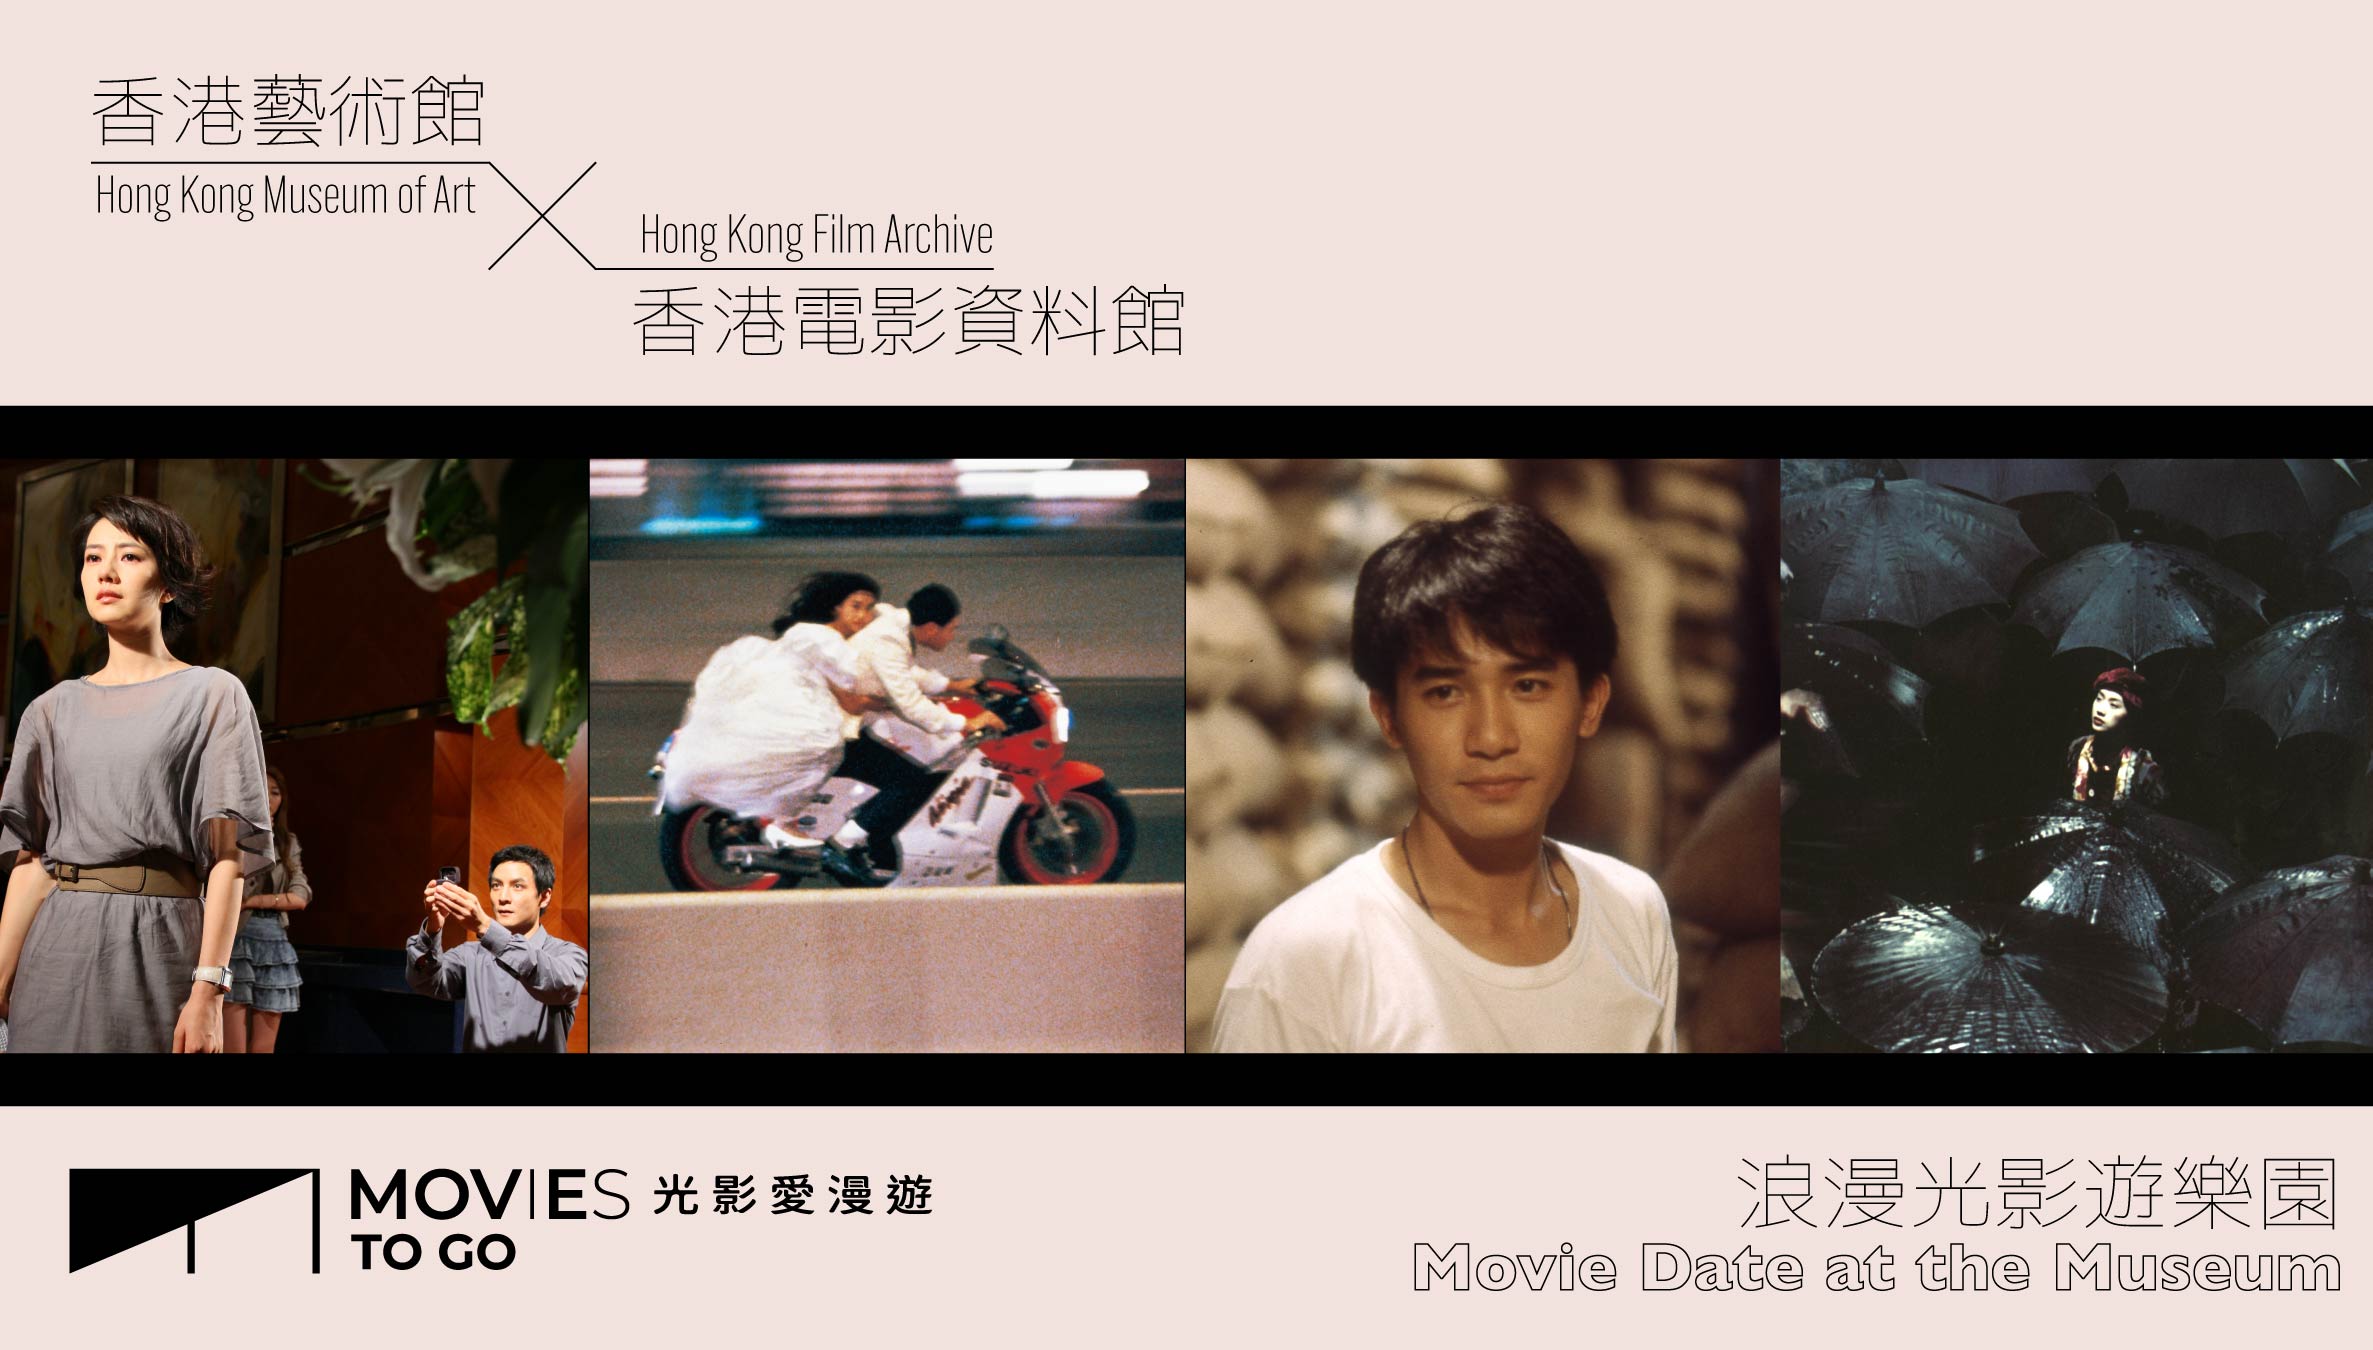 【Movies to GO】Hong Kong Museum of Art X Hong Kong Film Archive—Movie Date at the Museum 